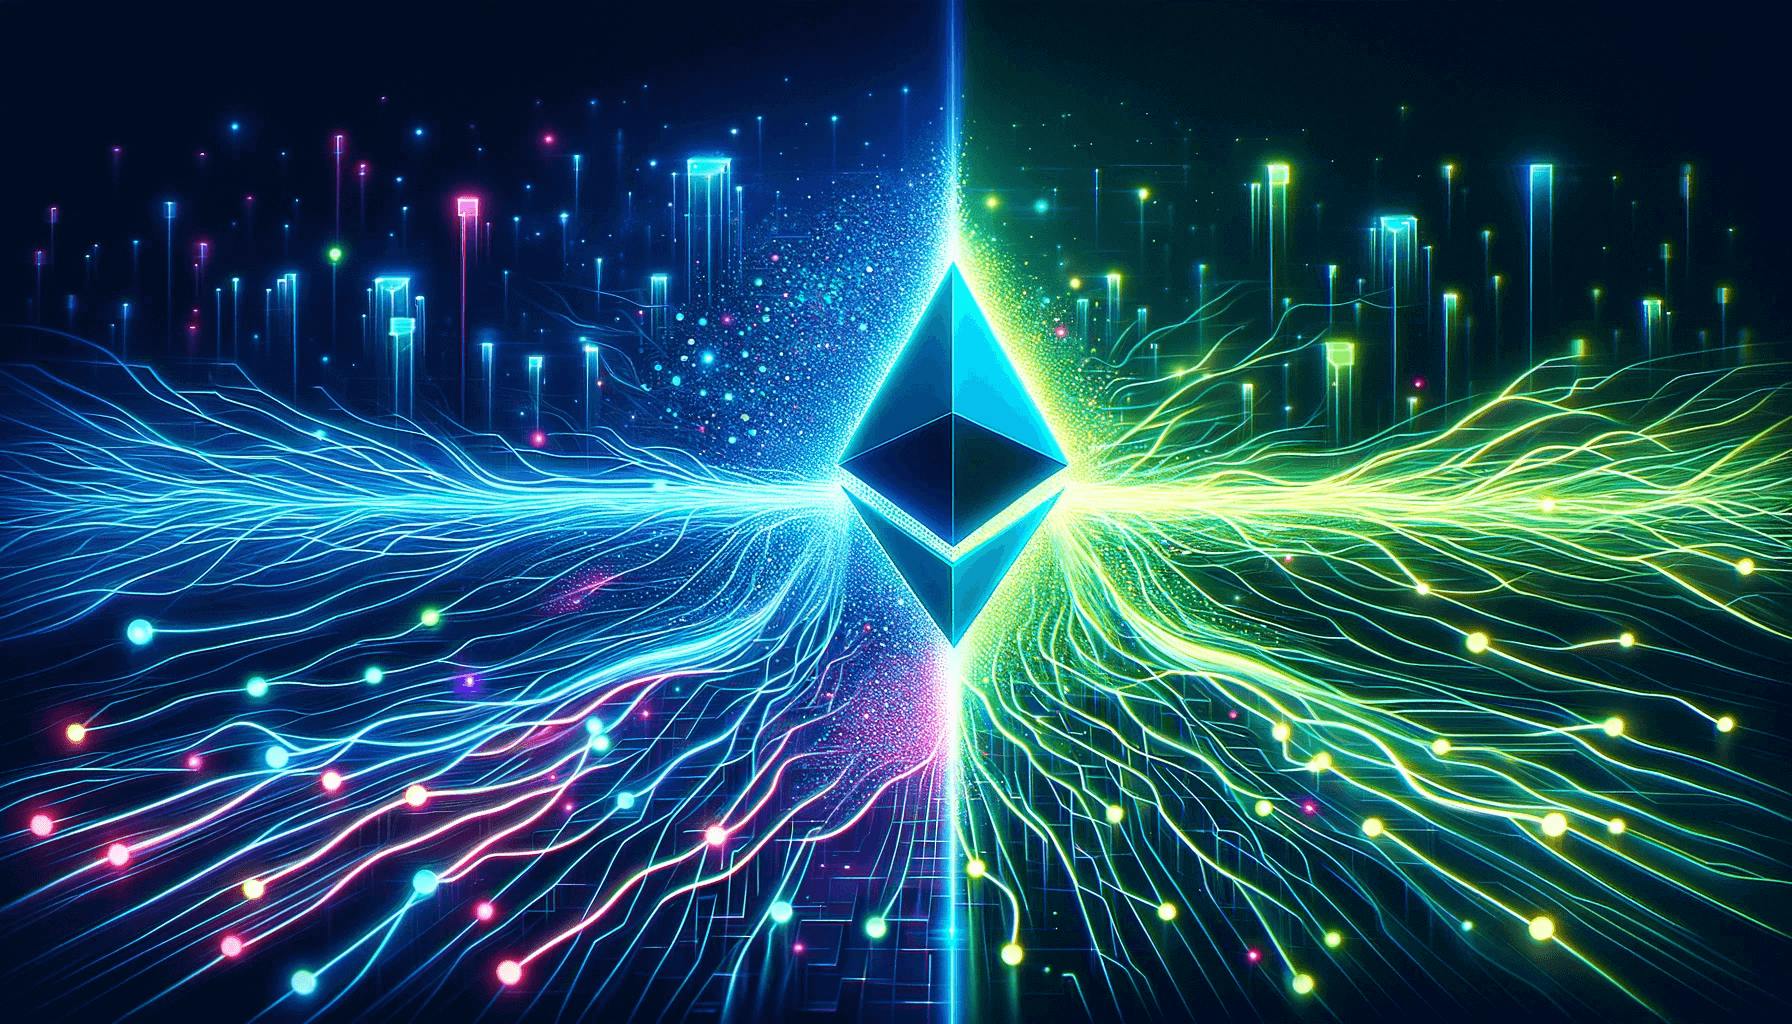 An image representing Ethereum's transition.